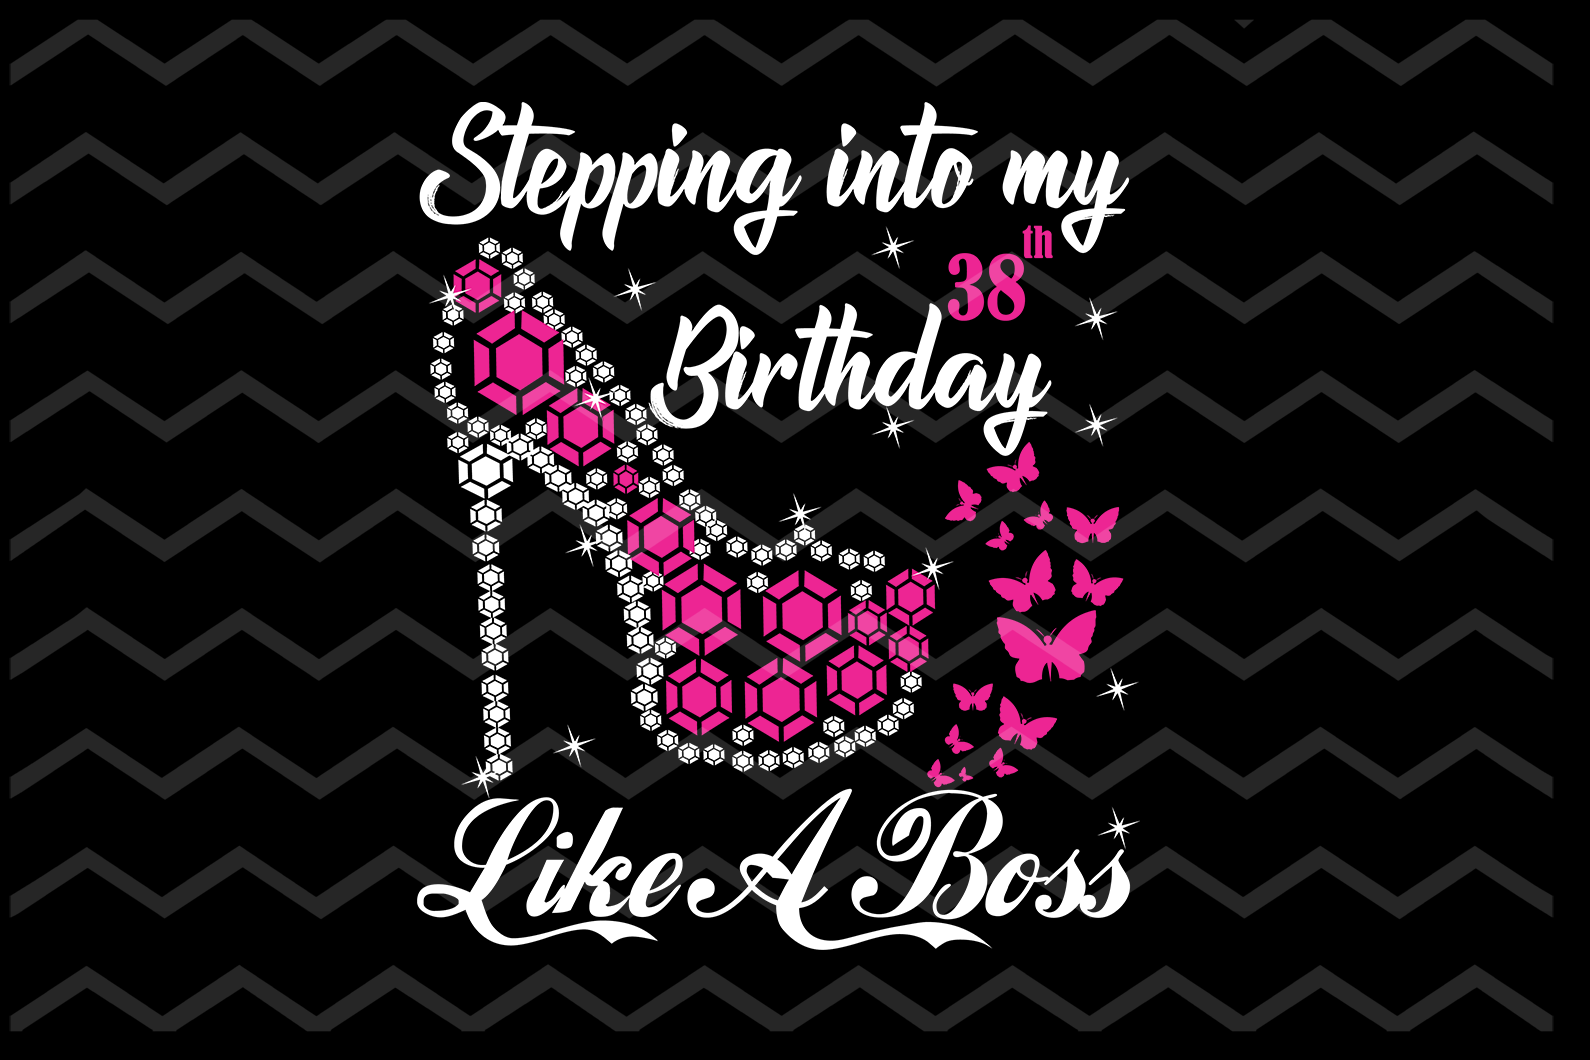 Download Stepping Into My 38th Birthday Like A Boss In Svg Included All Numbers Uranusdigital